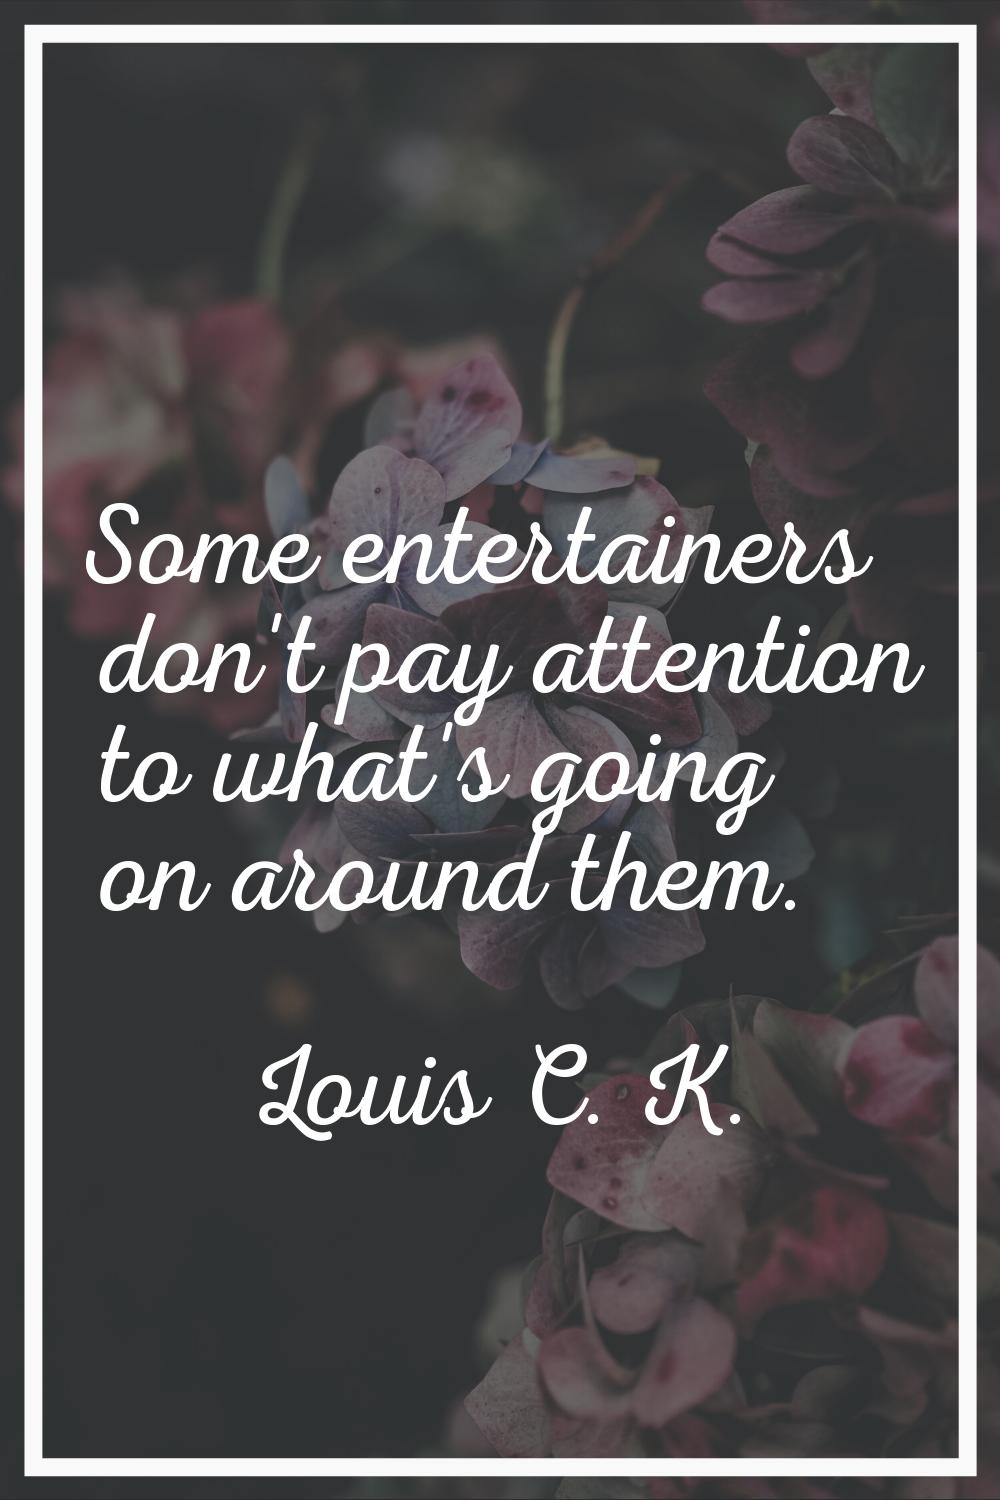 Some entertainers don't pay attention to what's going on around them.